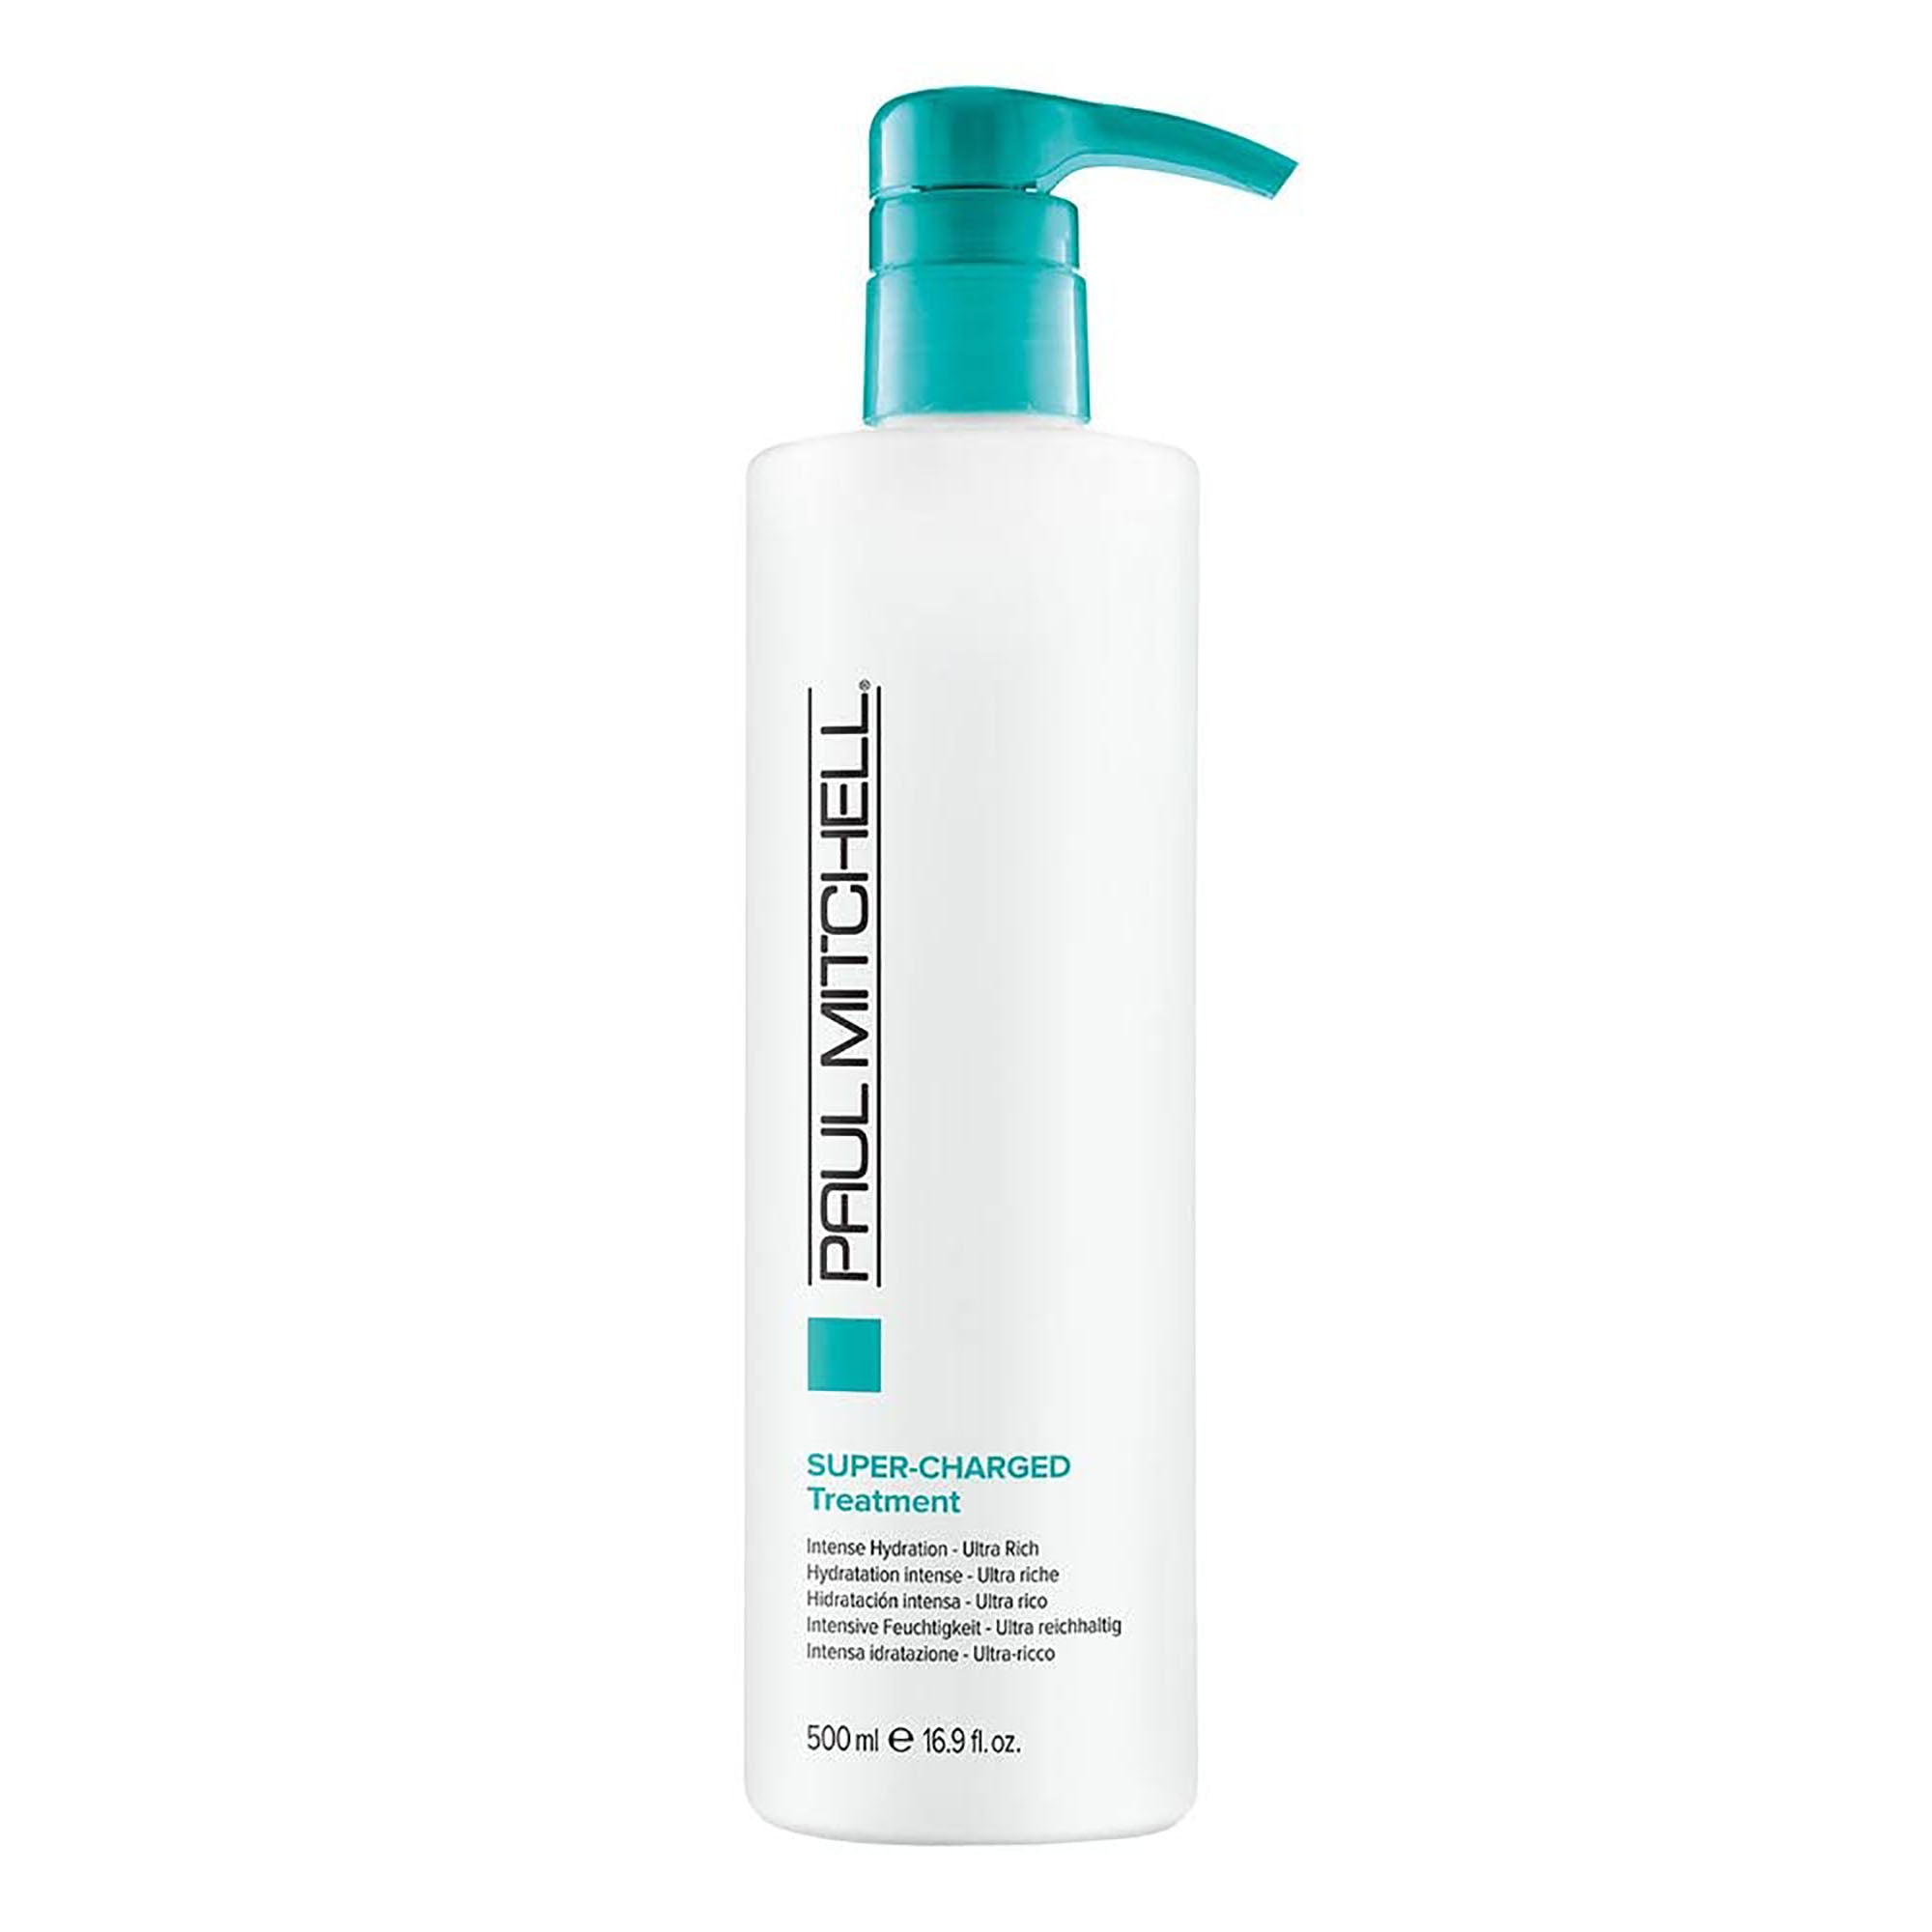 Paul Mitchell Super-Charged Treatment / 16.9